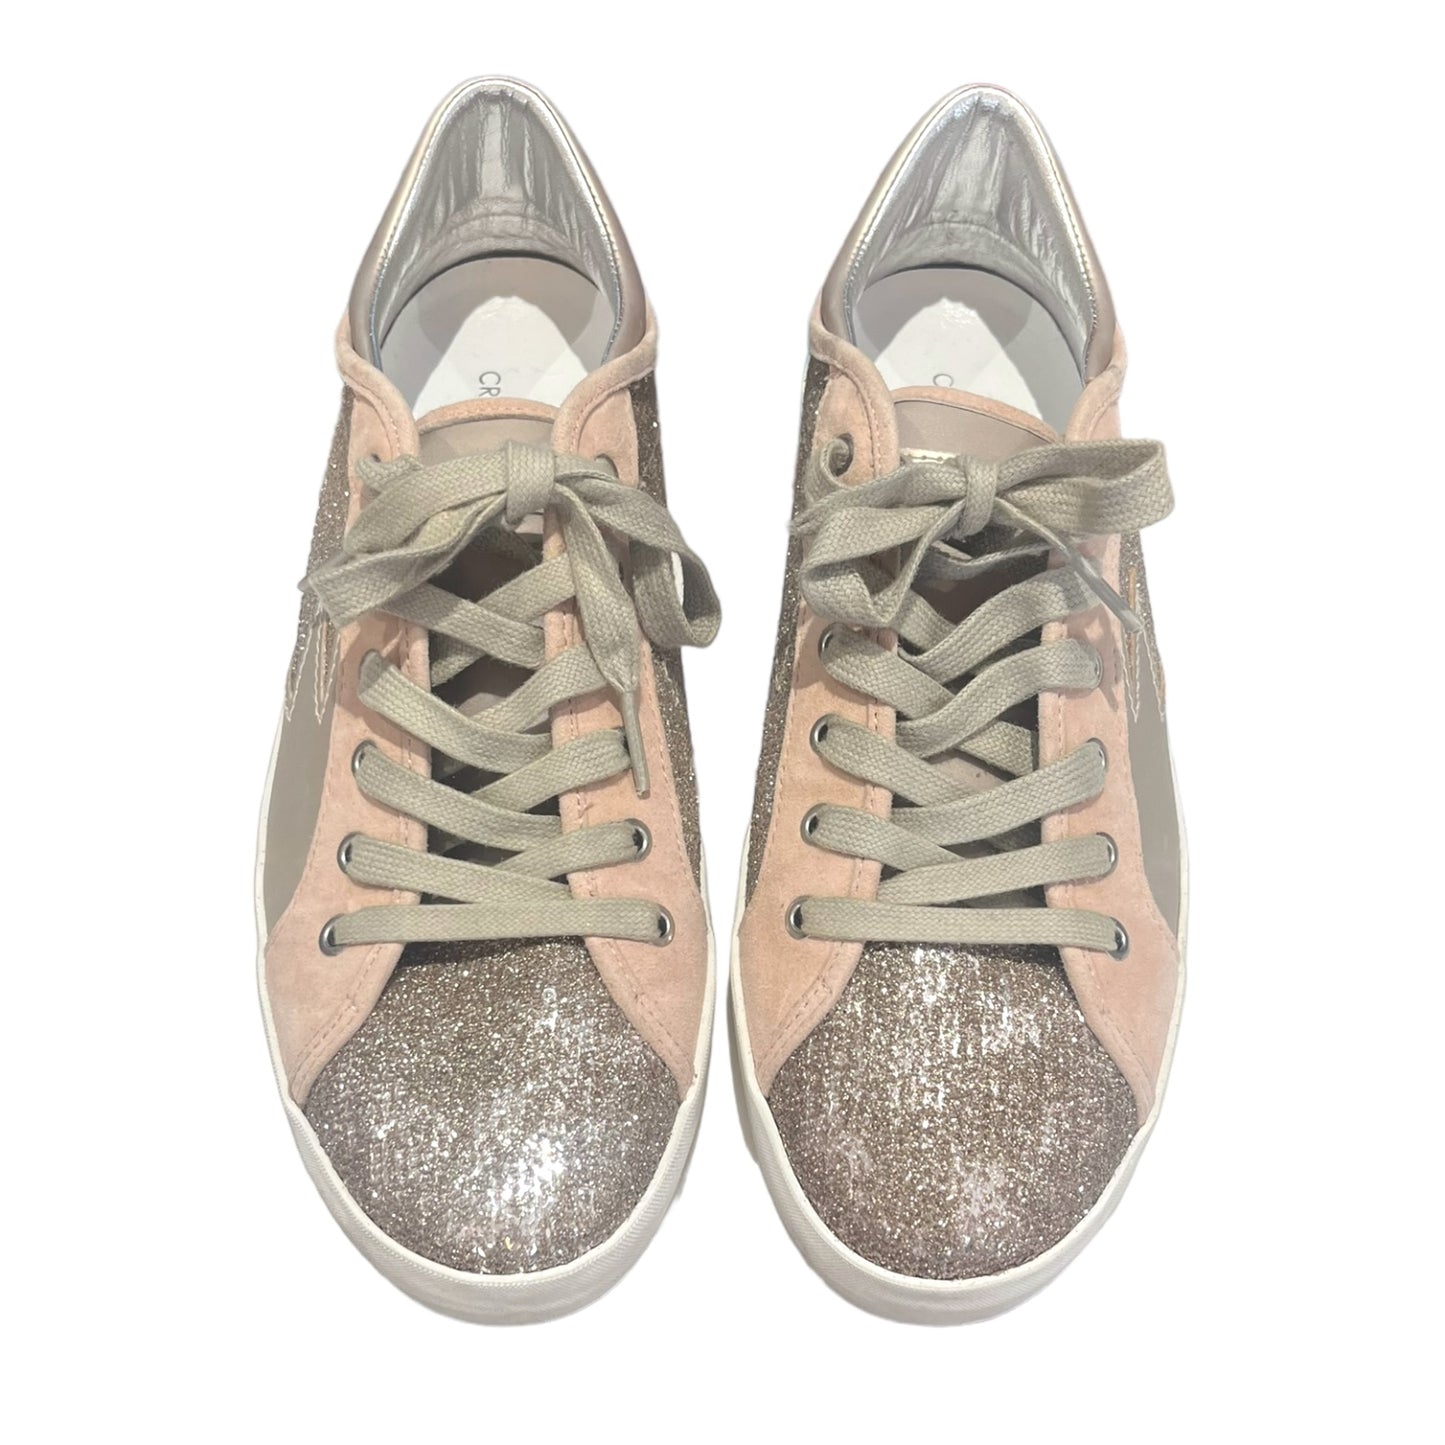 Crime London Pink Sequin Trainers - 6